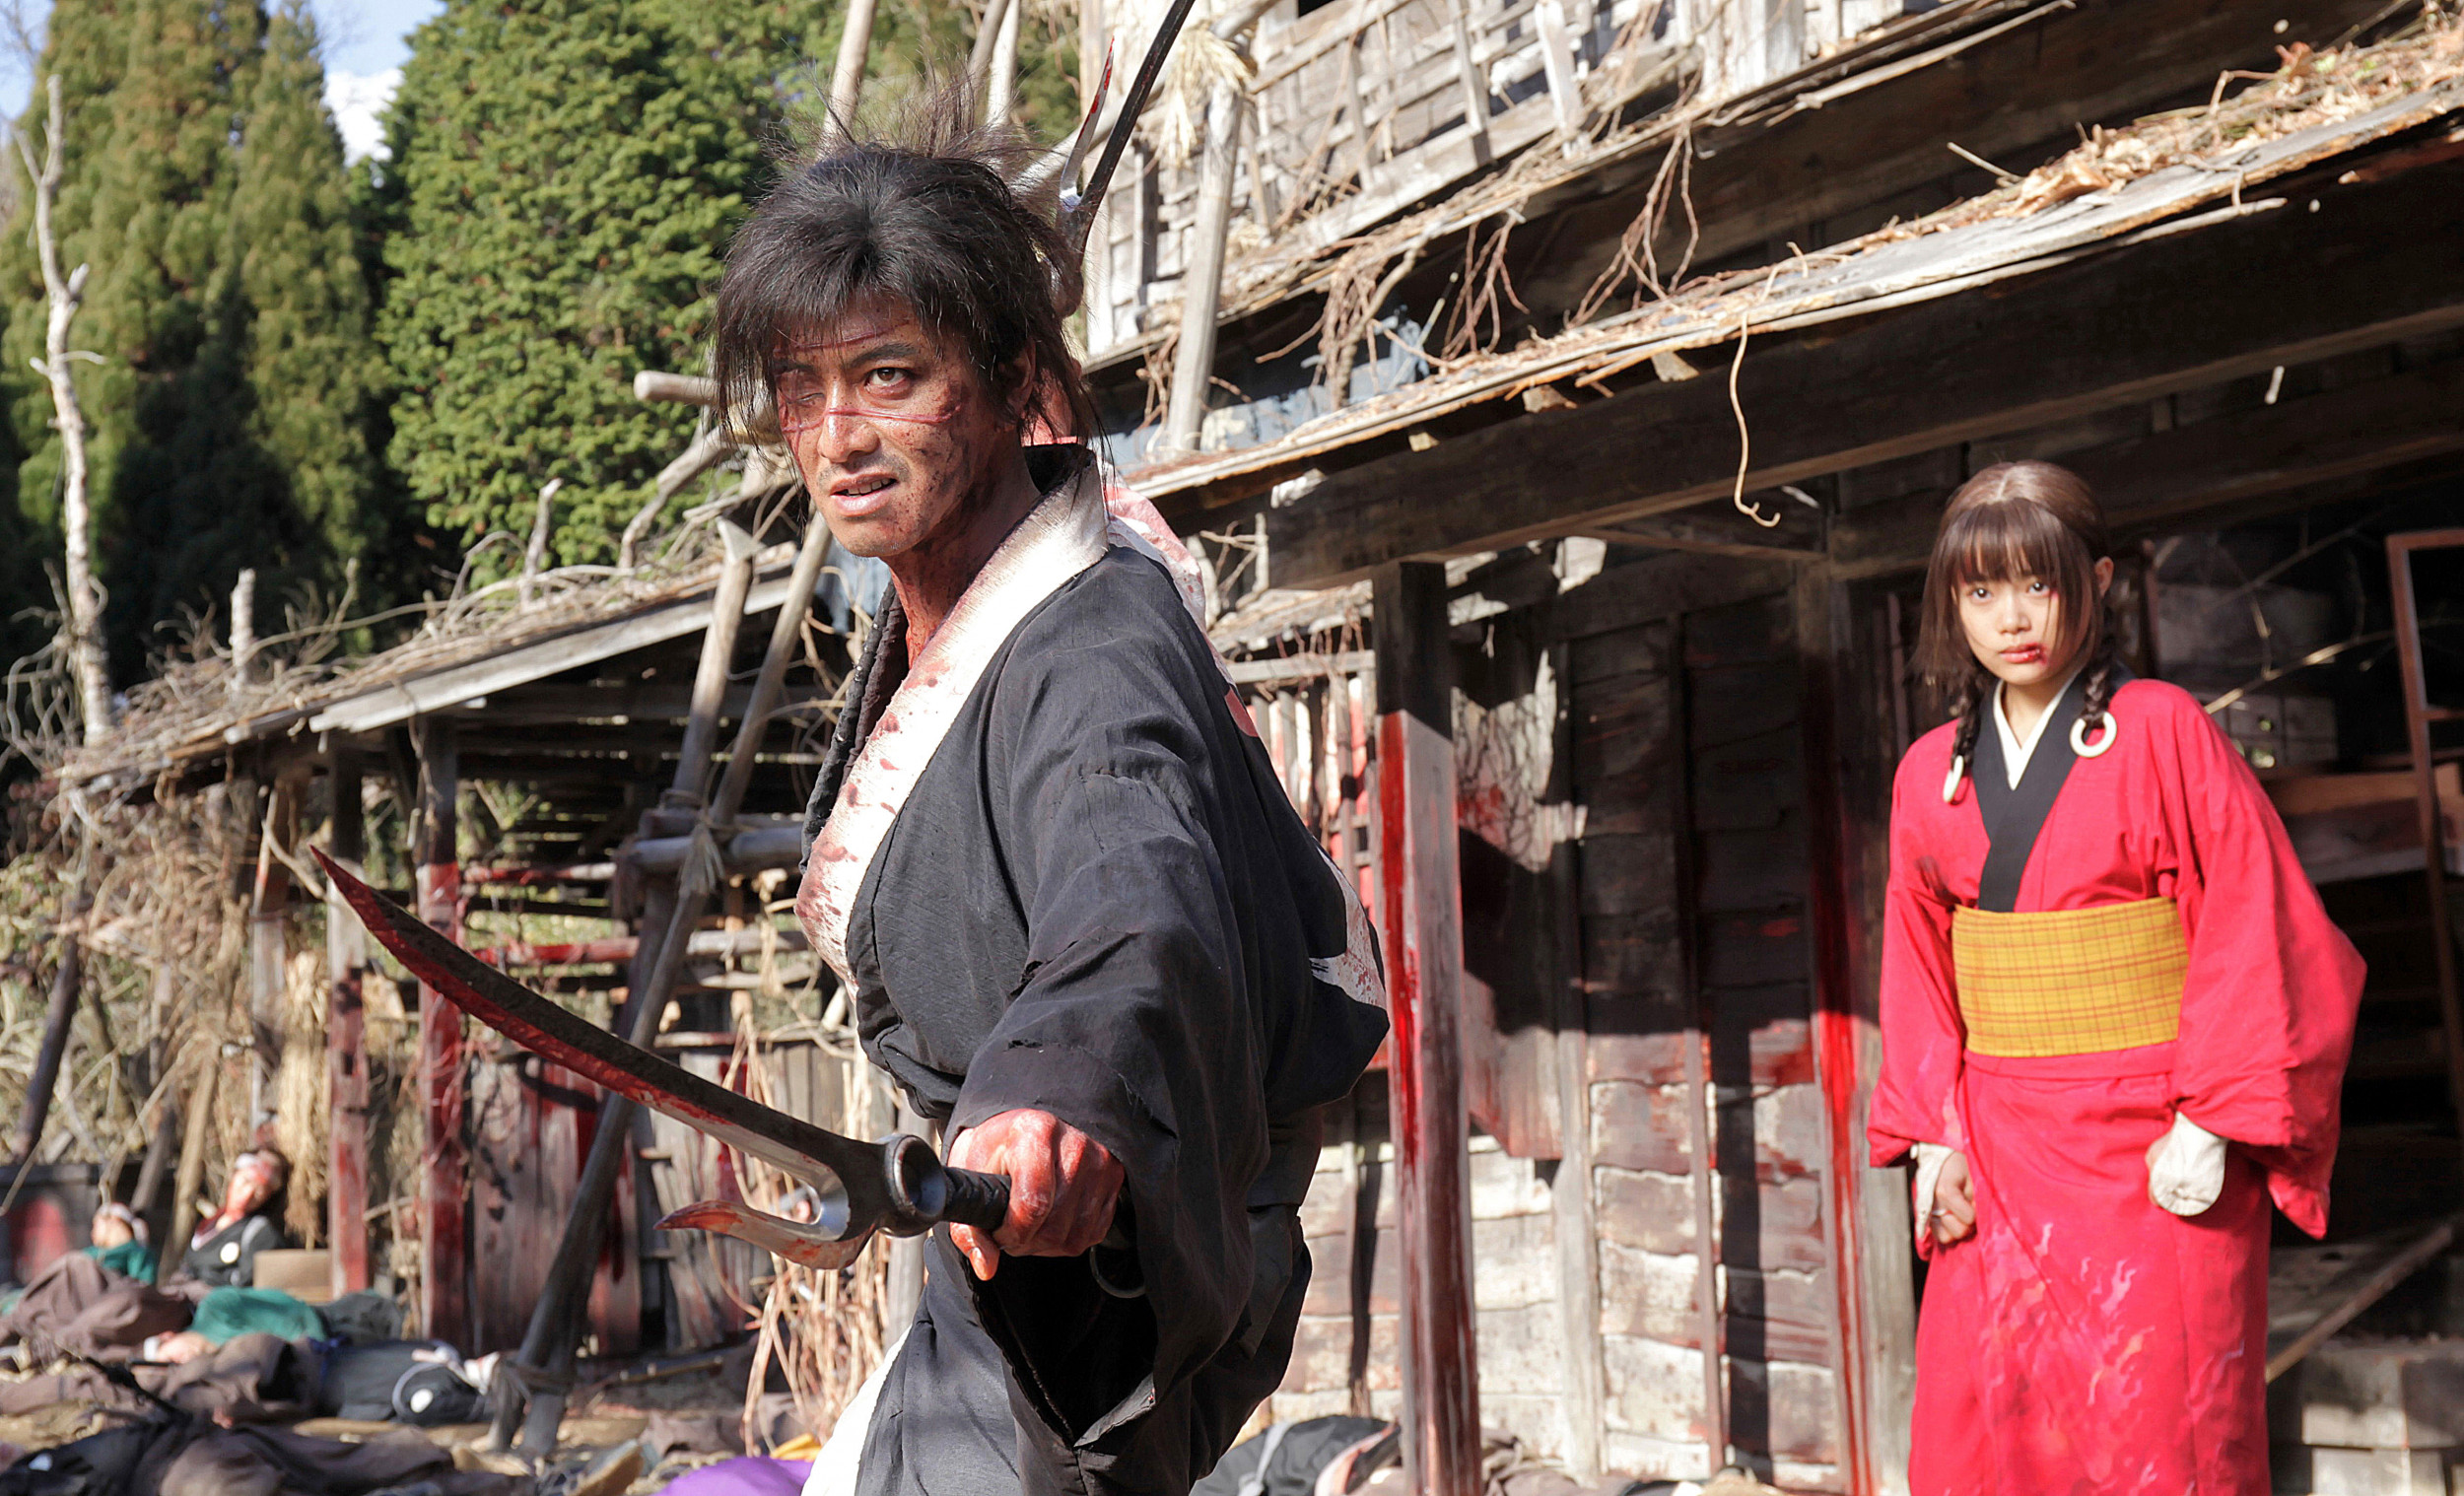 Rurouni Kenshin: The Beginning': How Does the Film Differ to the Manga?